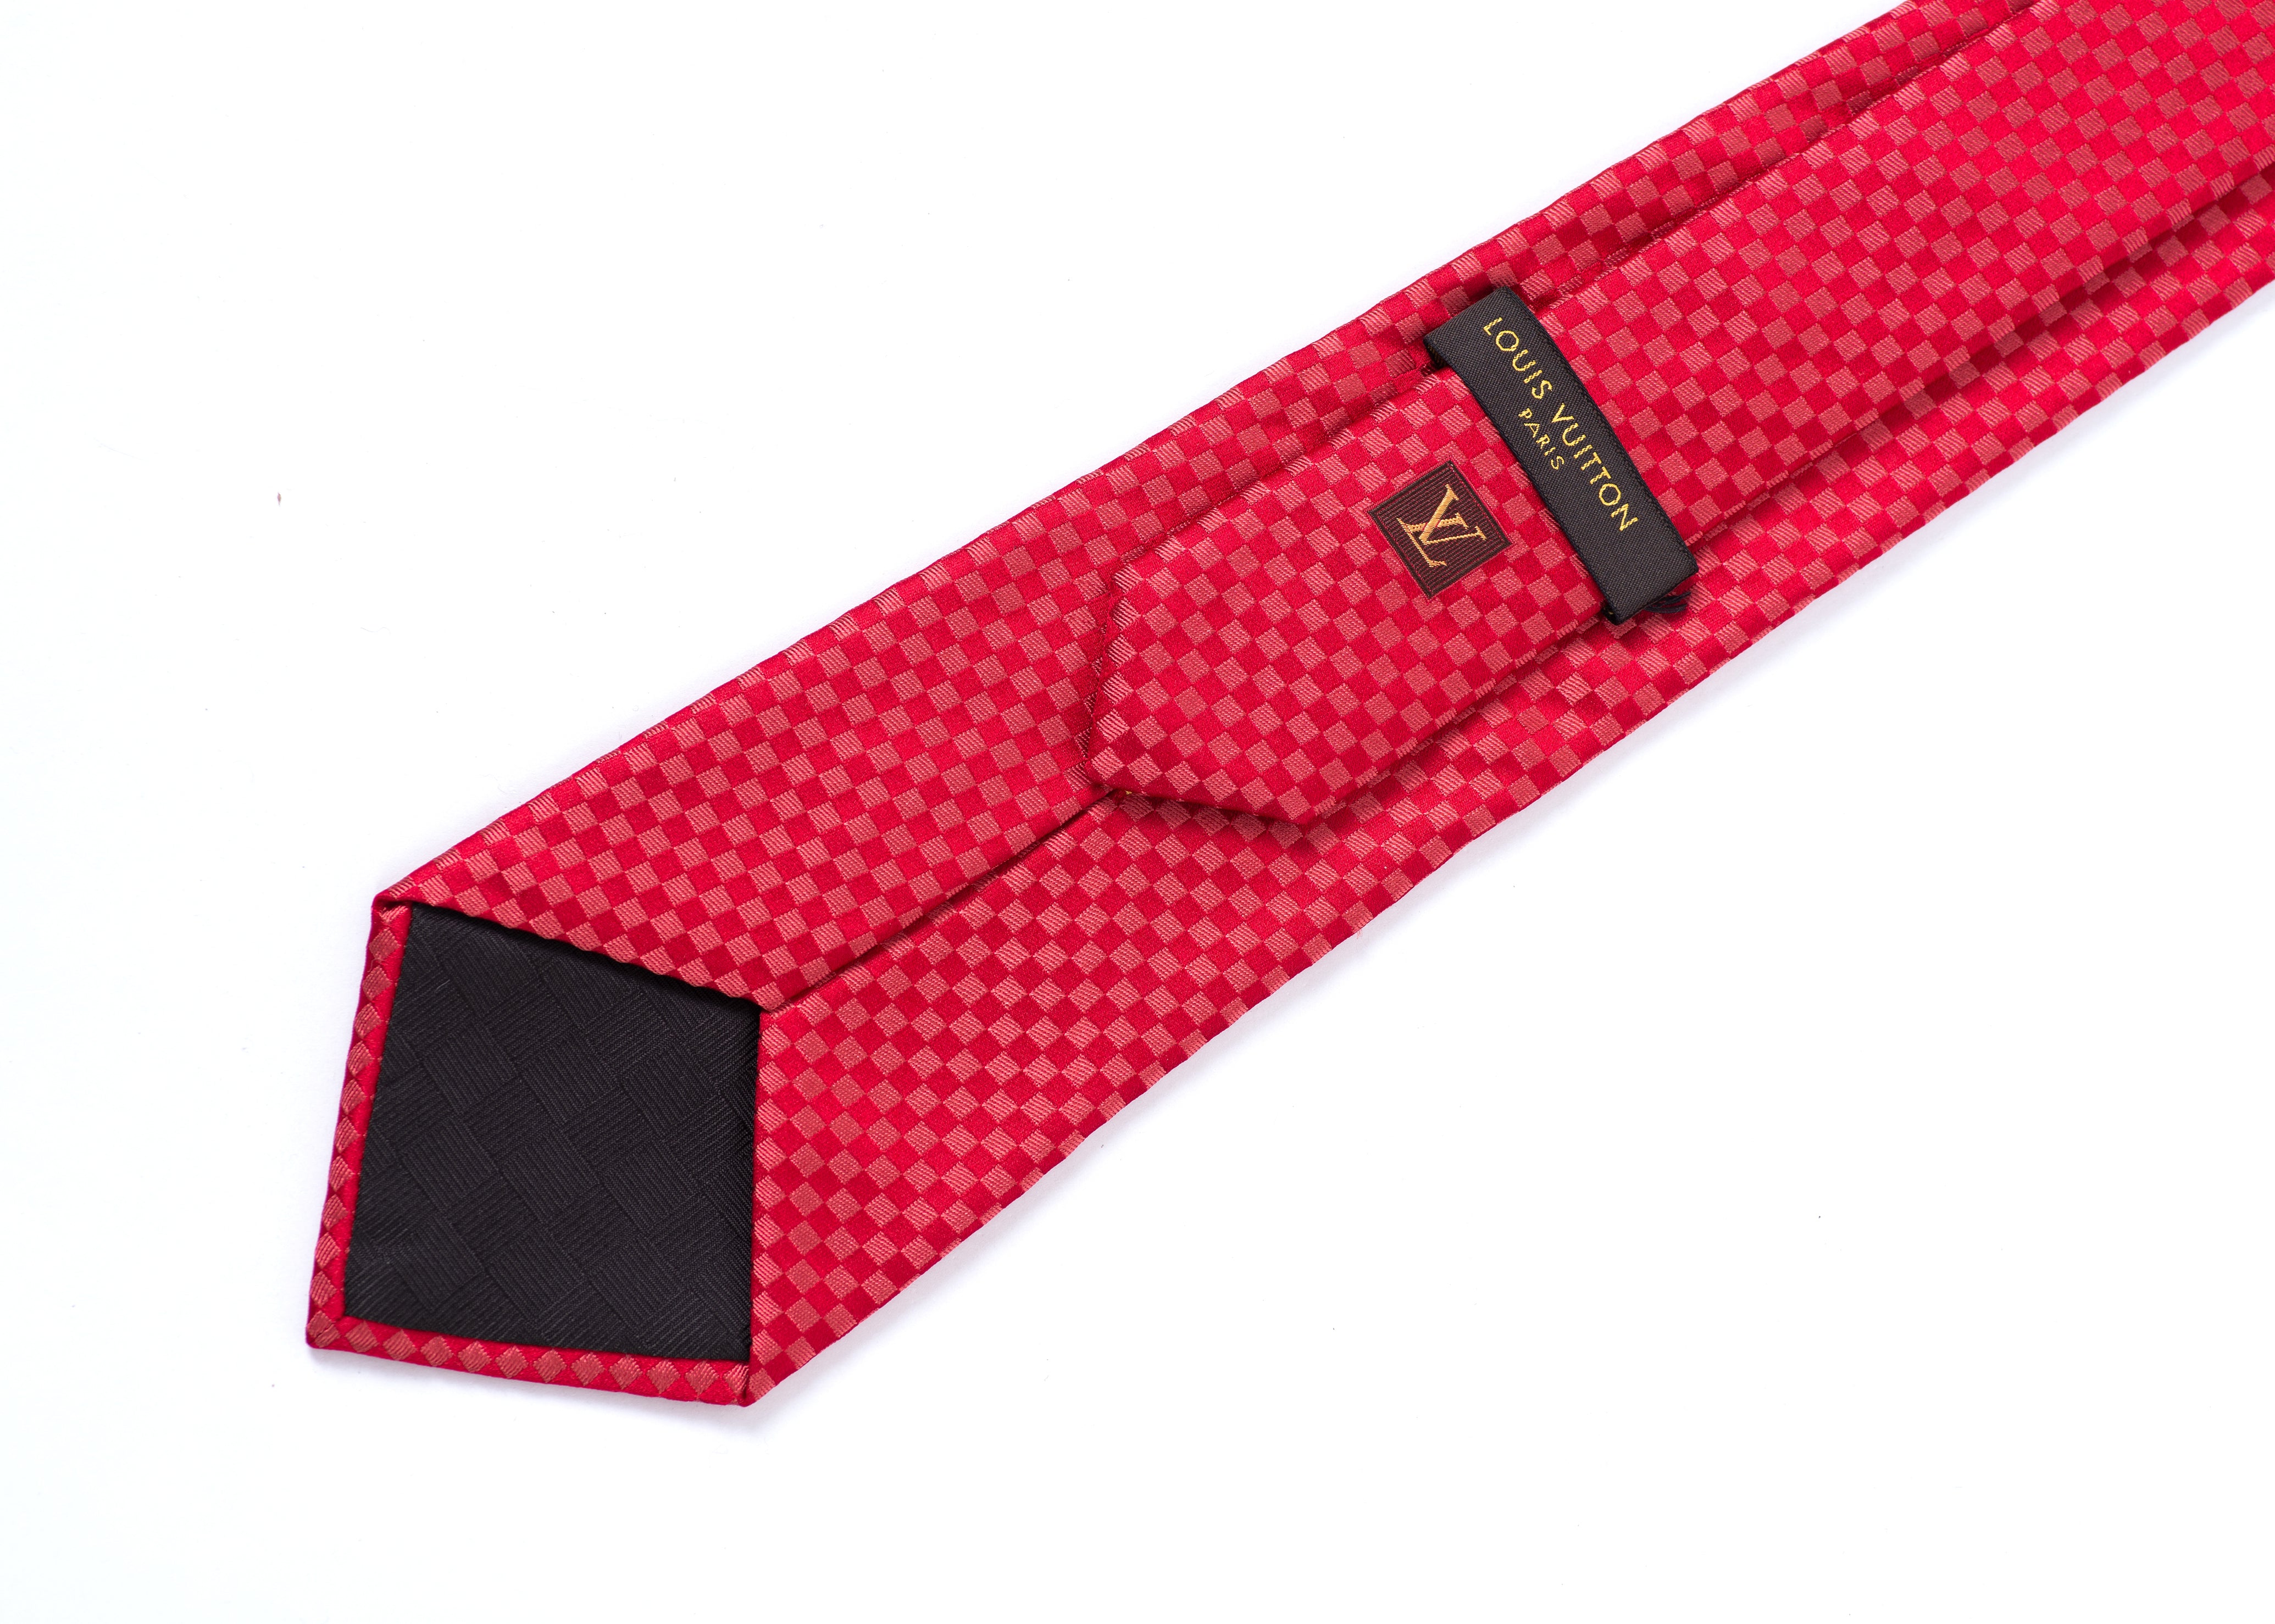 Louis Vuitton Silk Pattern Tie - Red Ties, Suiting Accessories - LOU803075